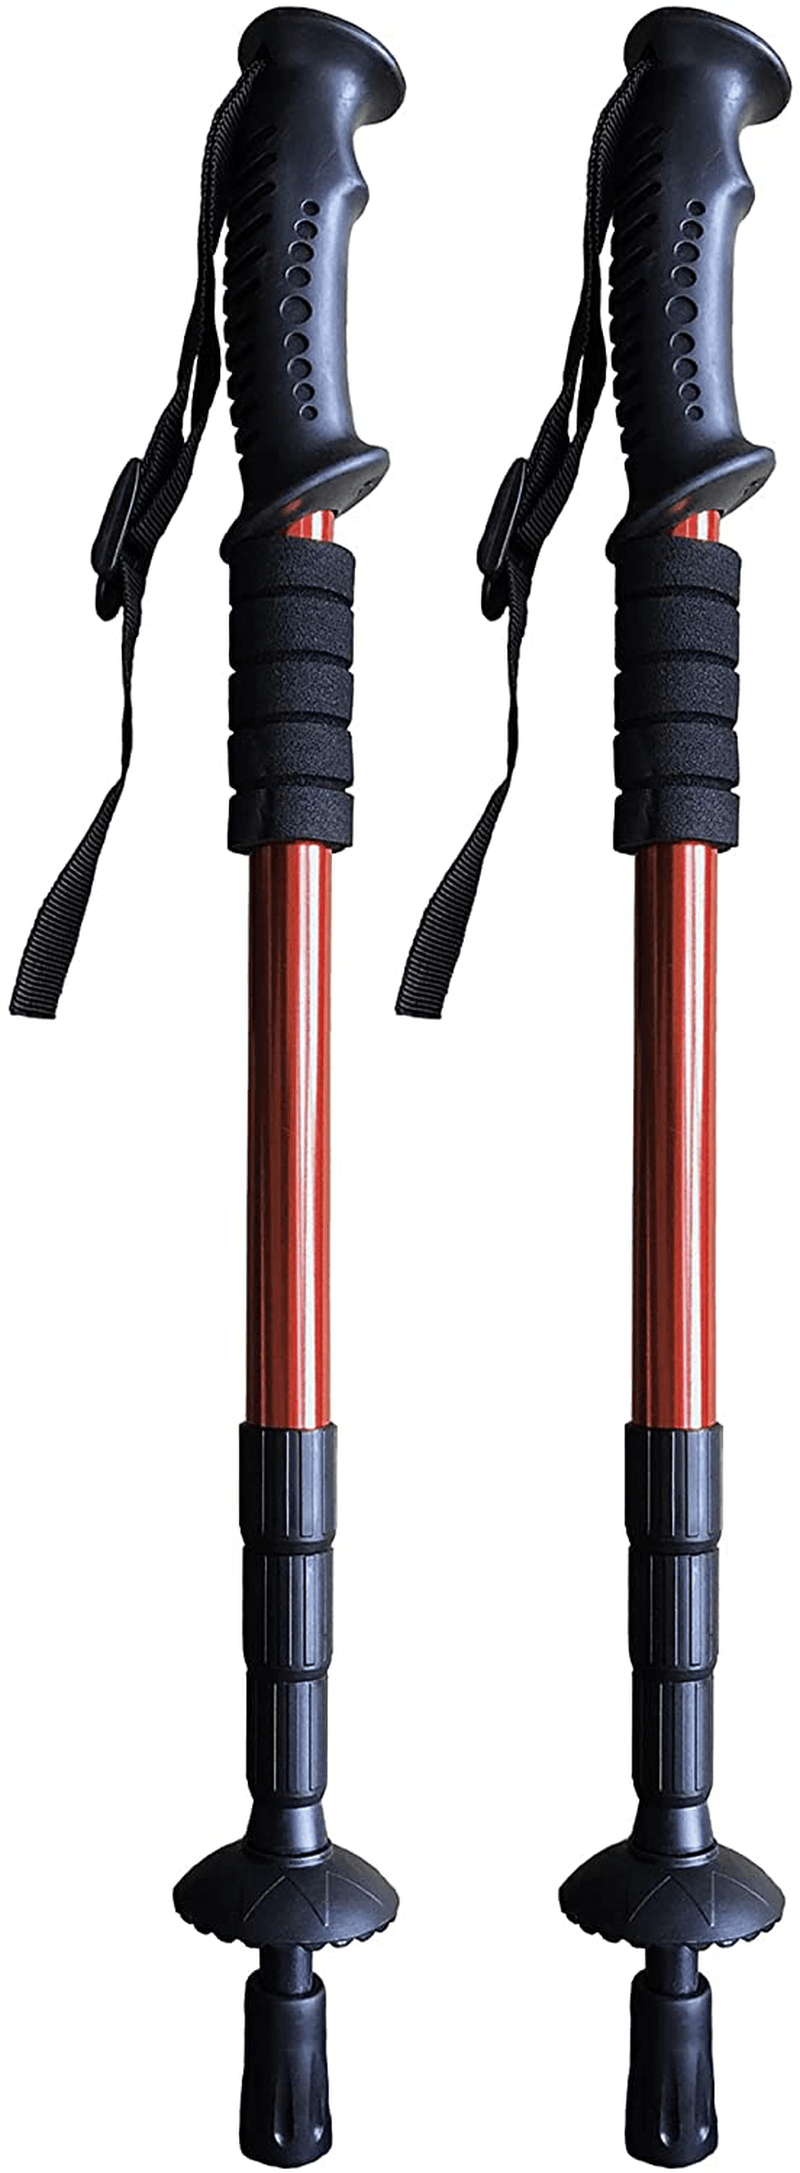 Walking Trekking Poles - 2 Pack with Antishock and Quick Lock System, Telescopic, Collapsible, Ultralight for Hiking, Camping, Mountaining, Backpacking, Walking, Trekking